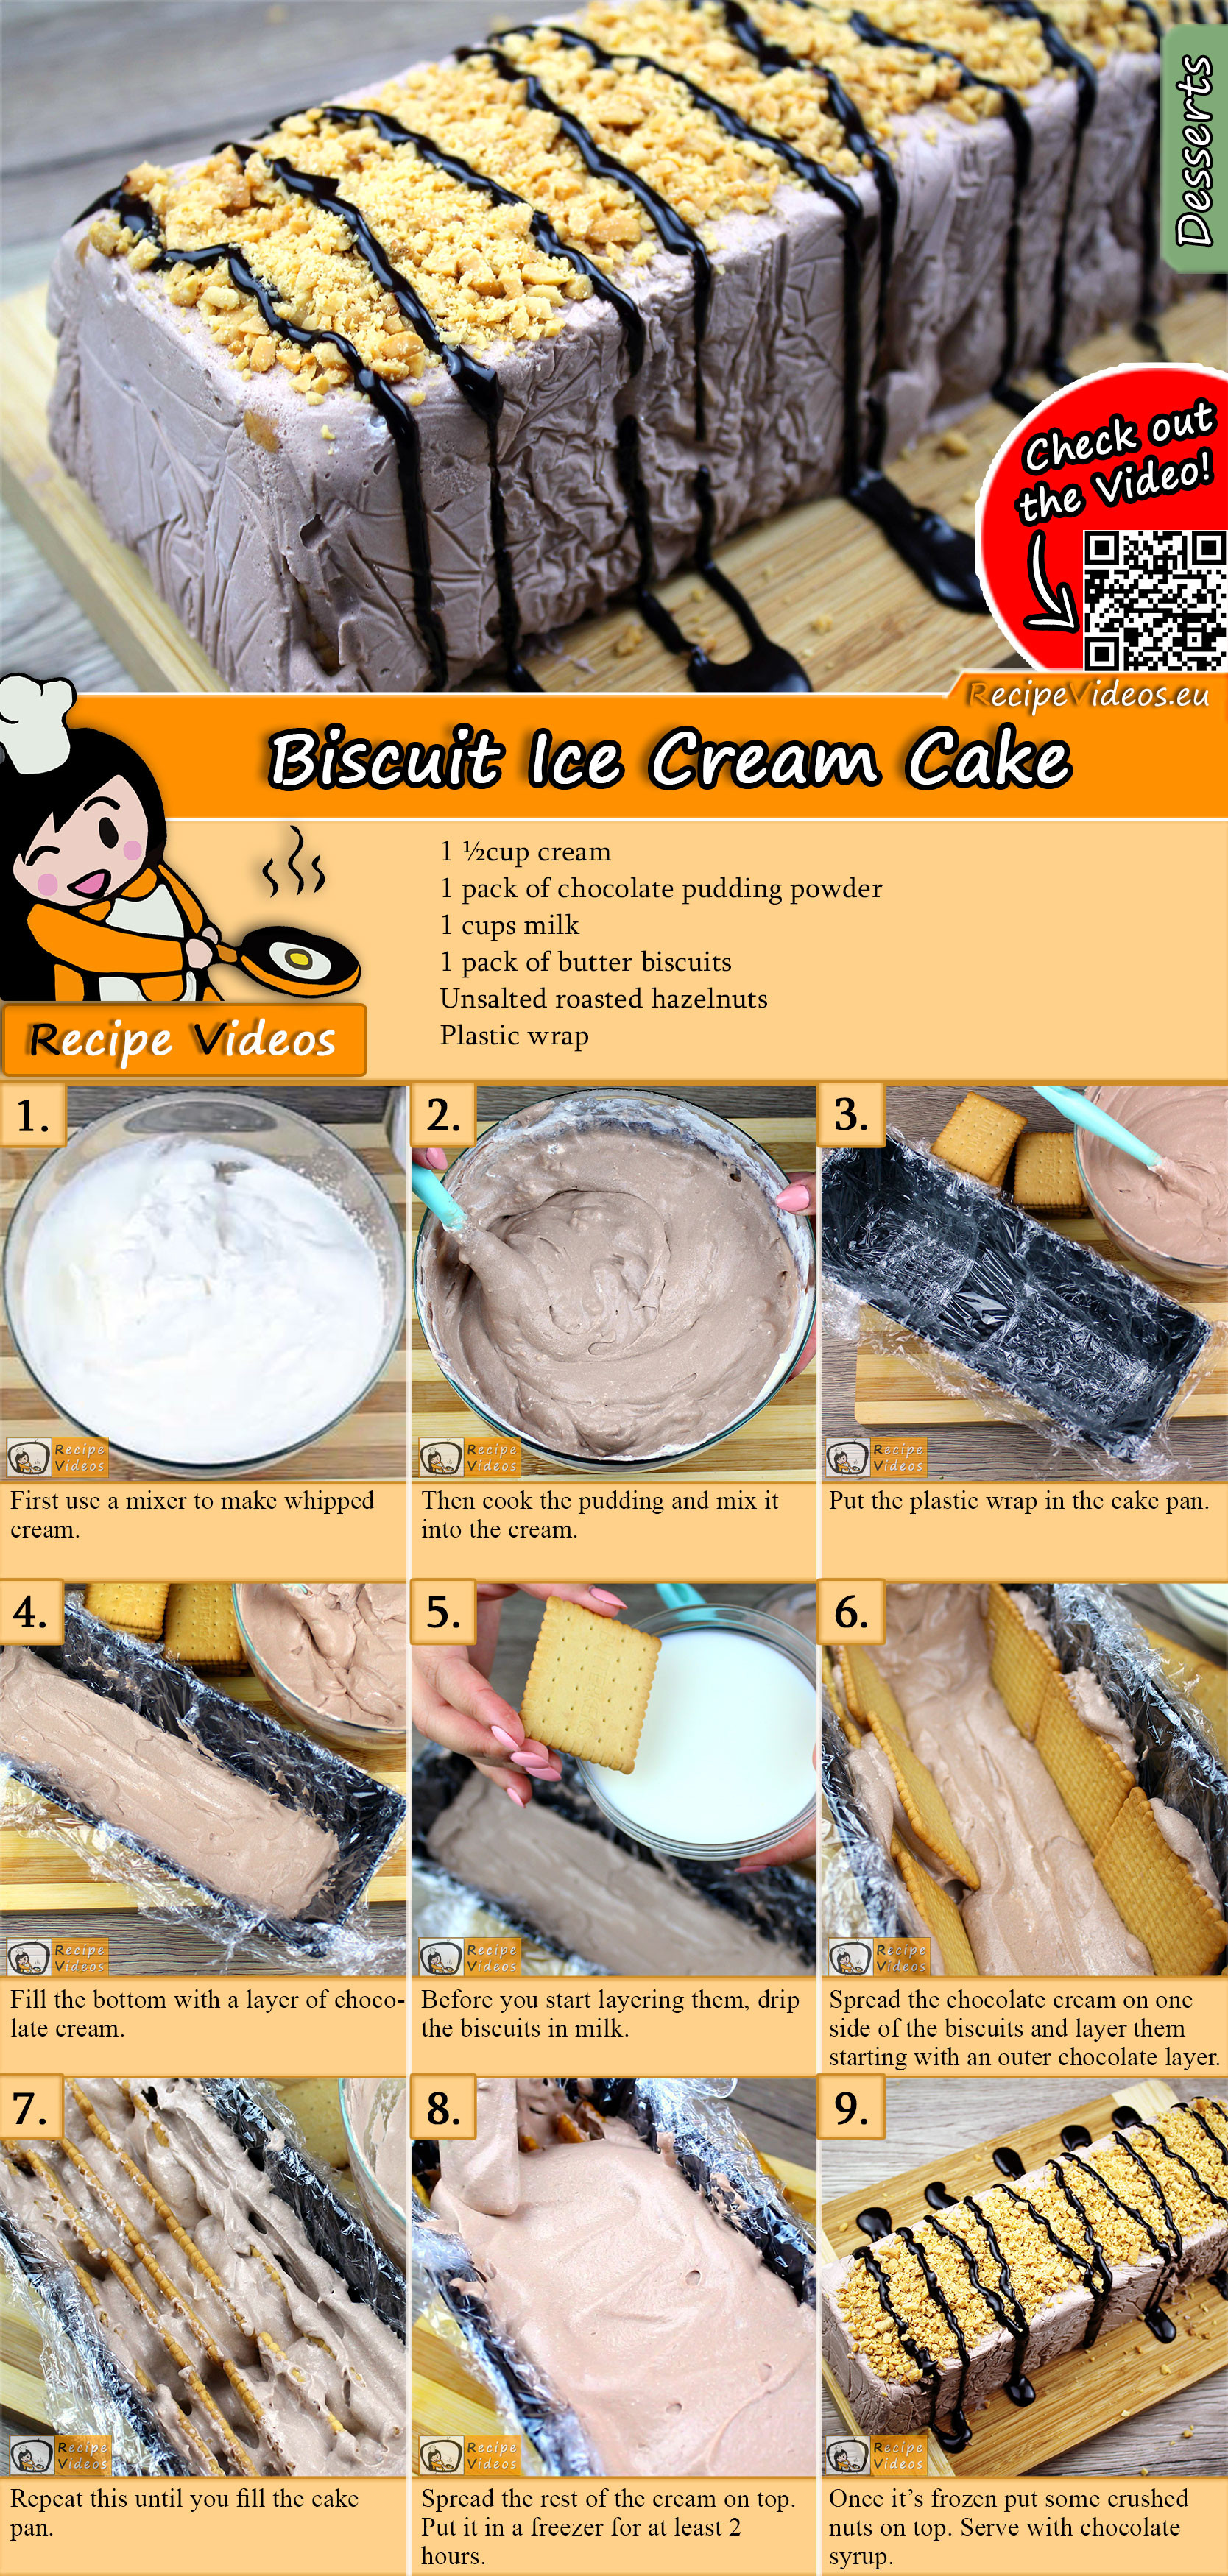 Biscuit Ice Cream Cake recipe with video